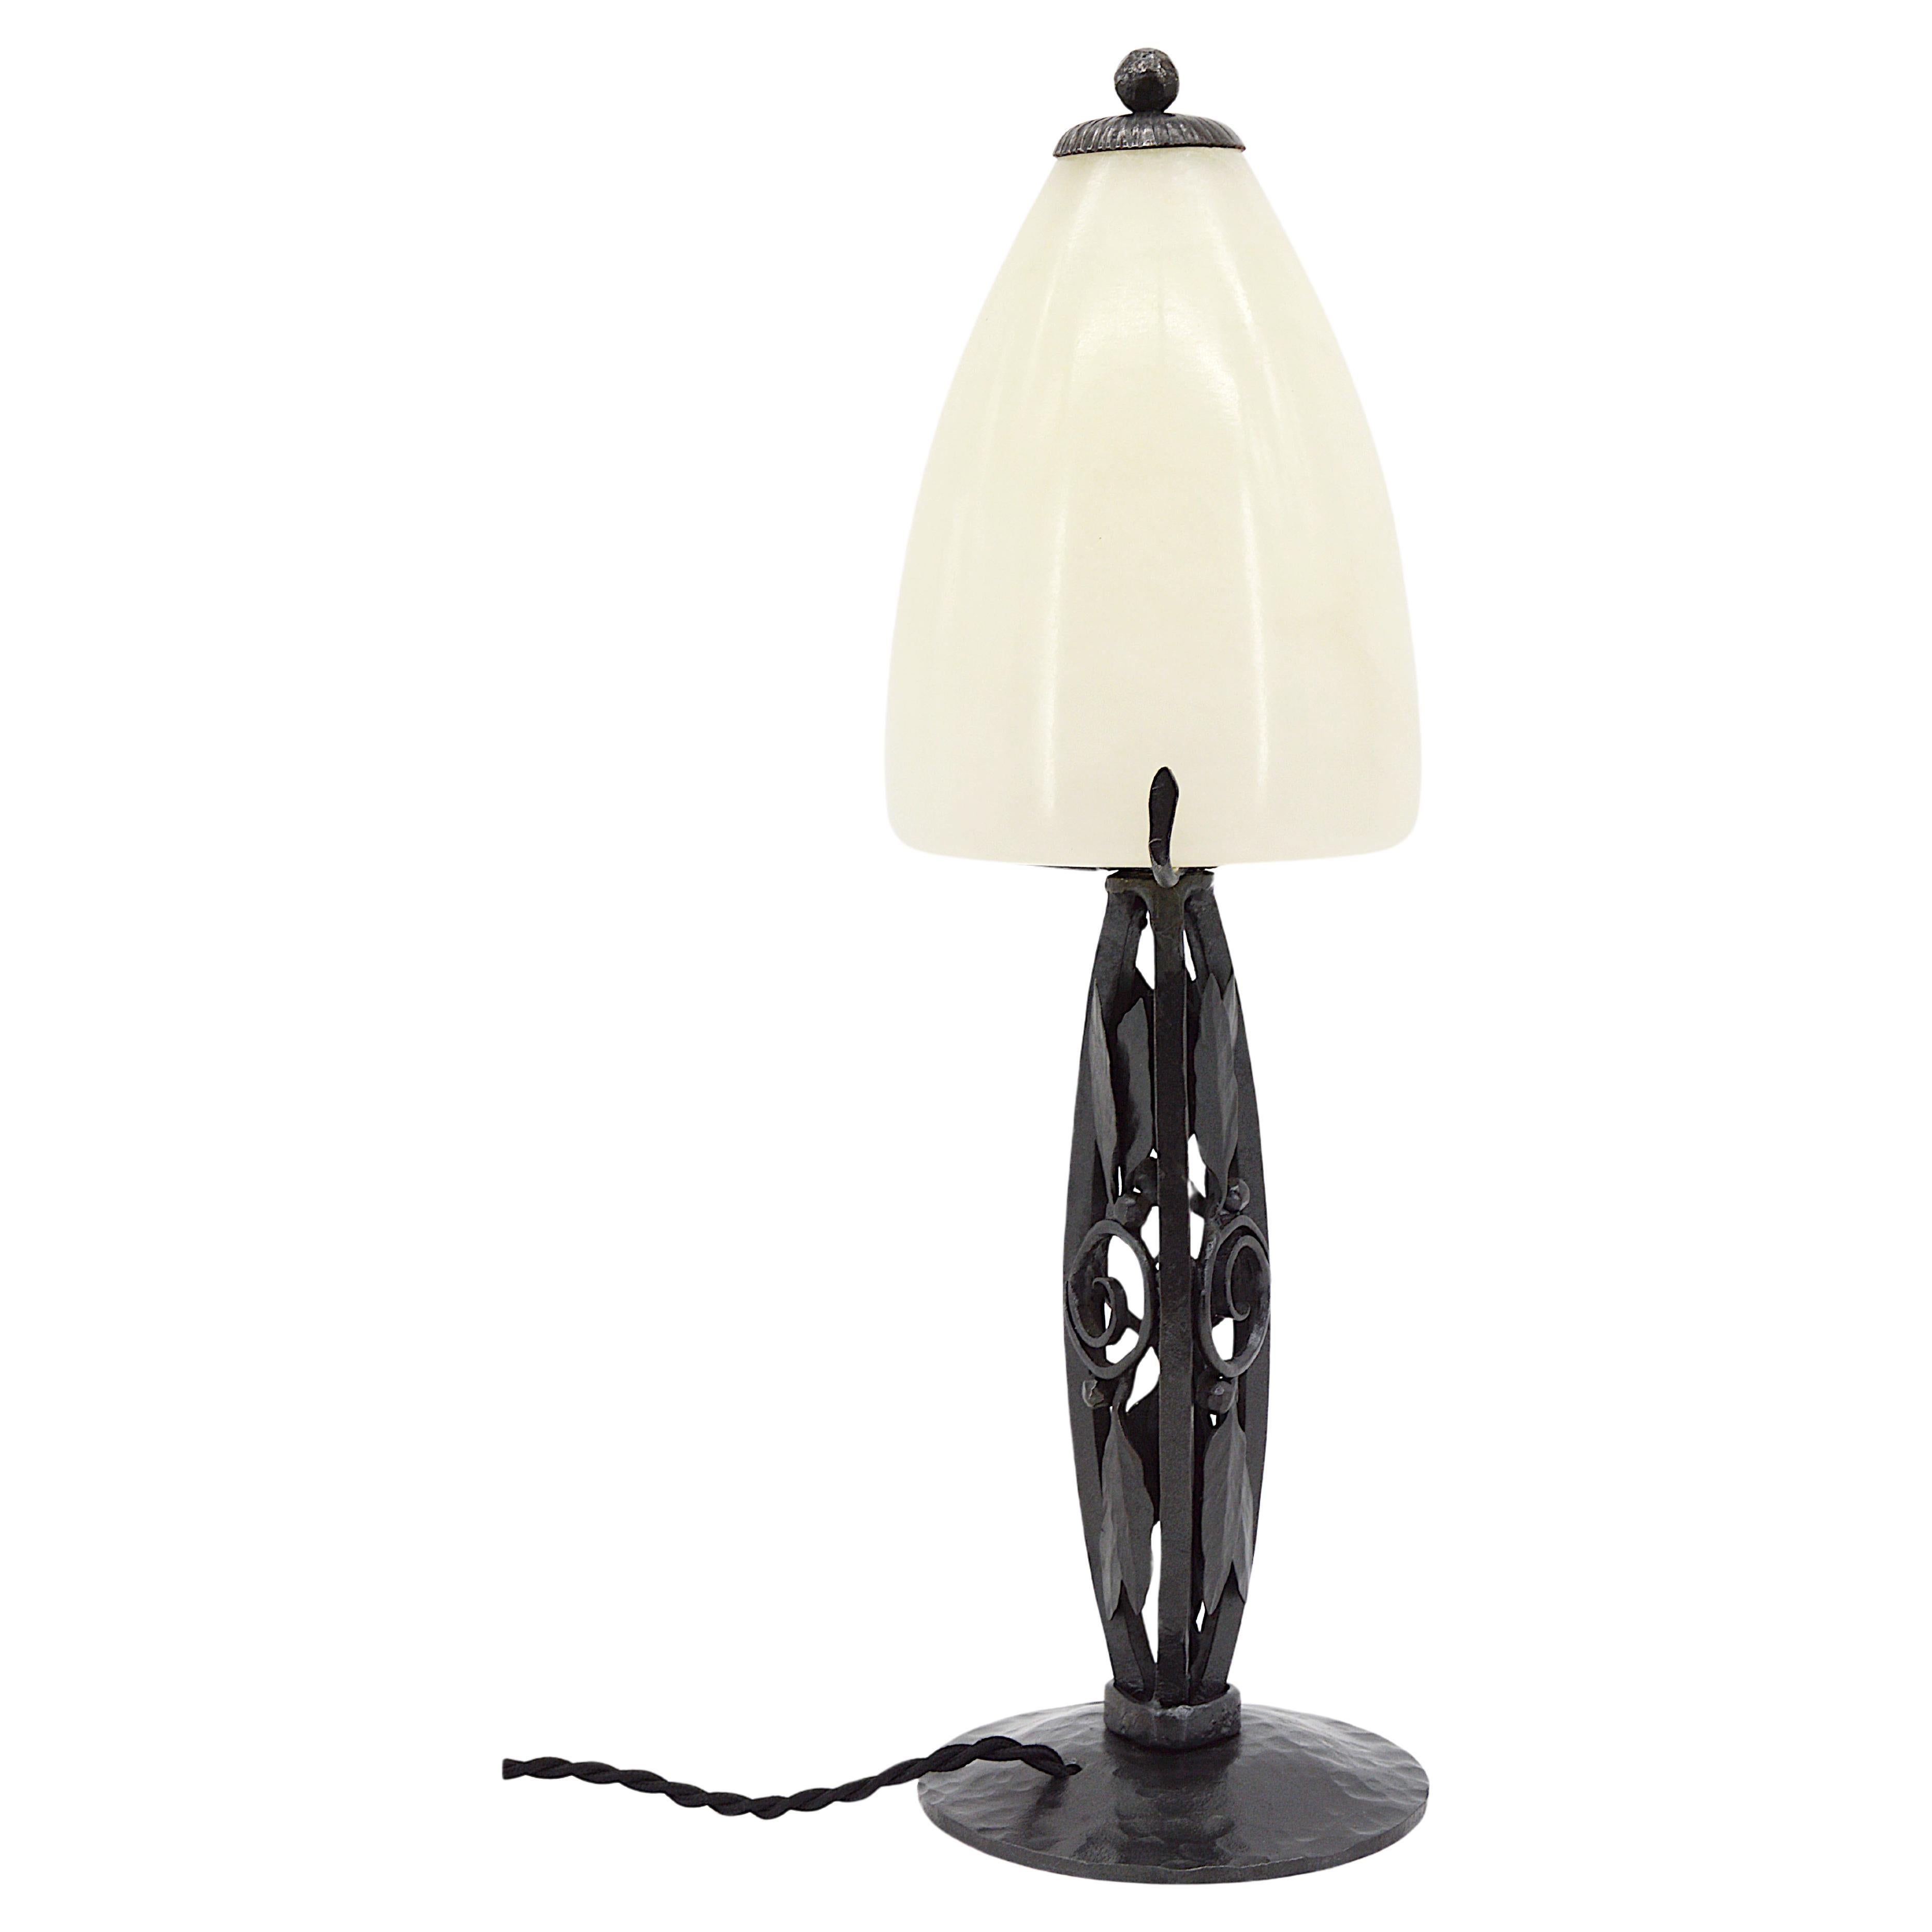 French Art Deco table lamp, France, 1920s. The precious base comes with its alabaster shade. Measures: Height 15